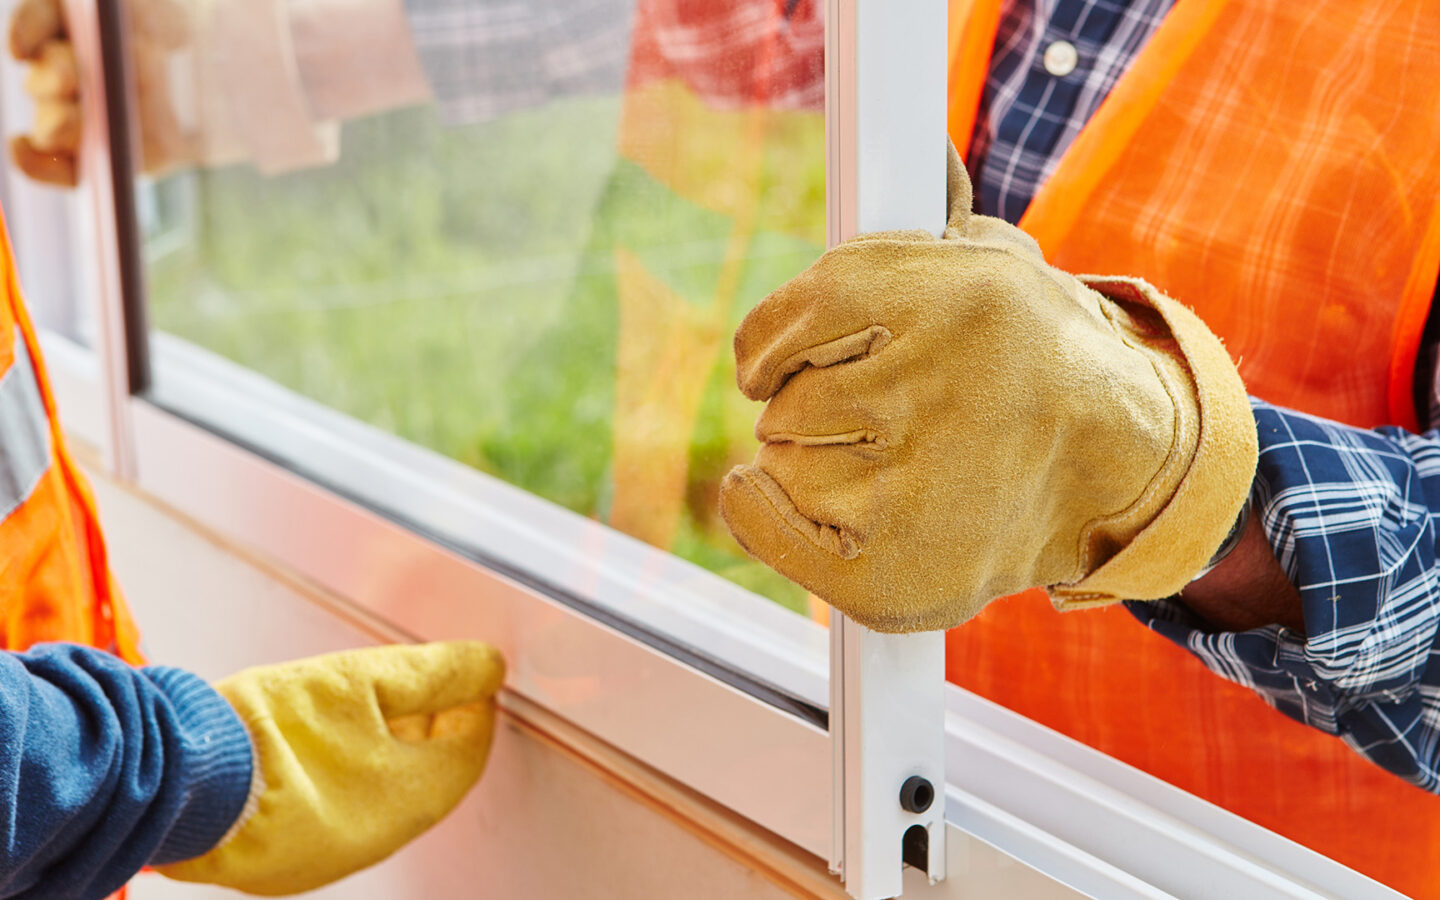 Two workers installing a new window in a home. The image is cropped to show torsos, hands, and arms as they work. They are wearing orange construction vests, work gloves, and long sleeve shirts.